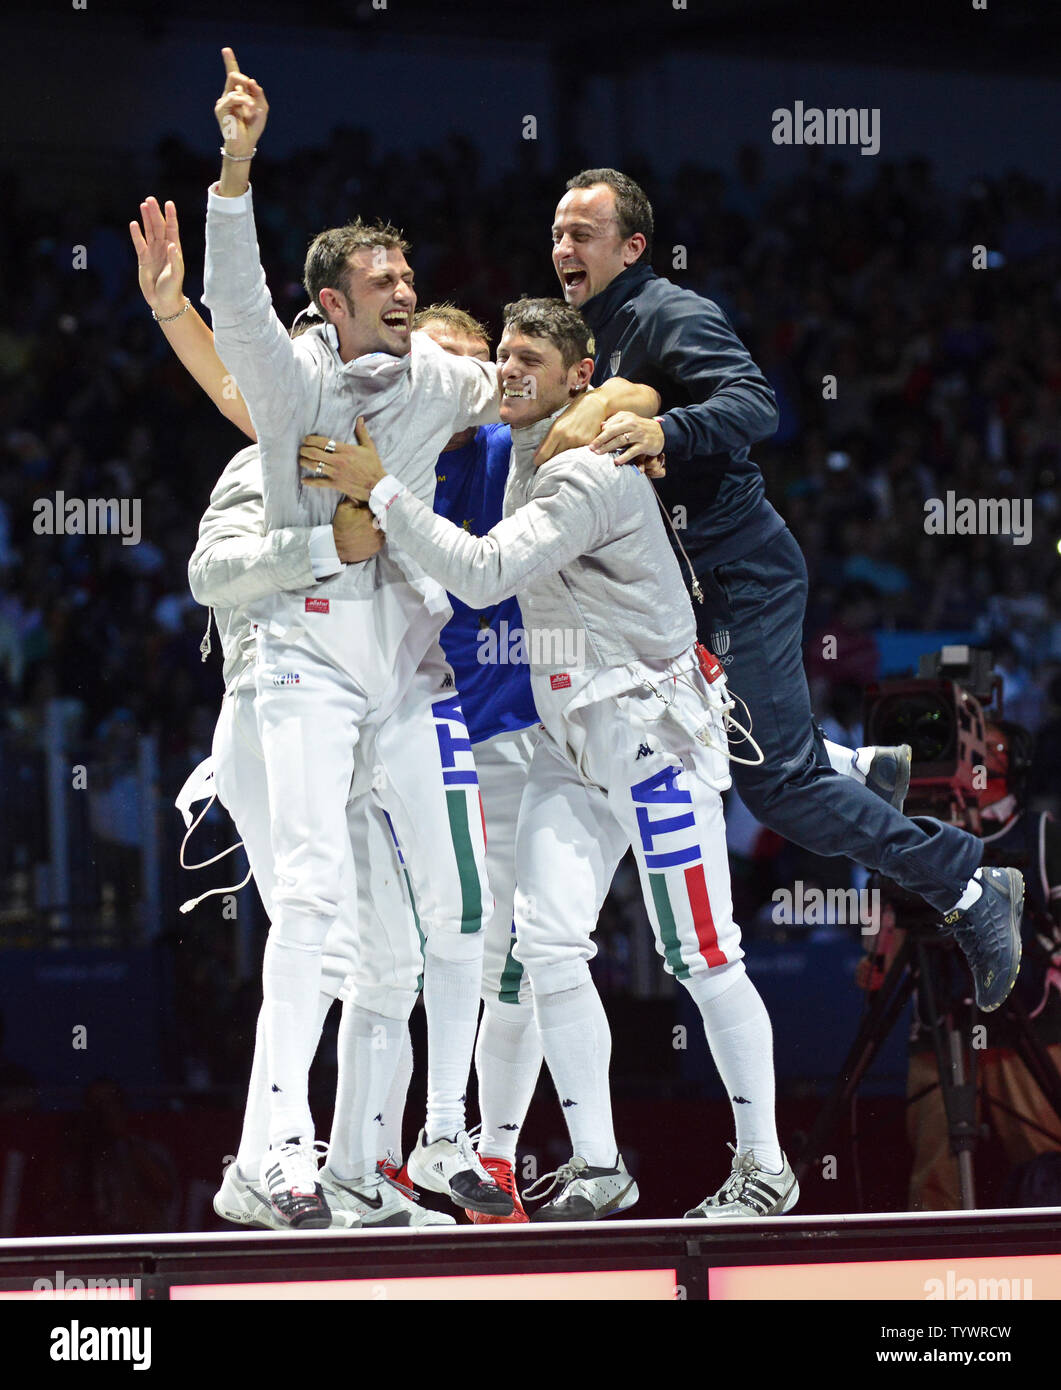 The Italian Men's Sabre Team celebrates its 45 - 40 victory over Russia in the Bronze Medal match at the London 2012 Summer Olympics on August 3, 2012 in London.   UPI/Ron Sachs Stock Photo